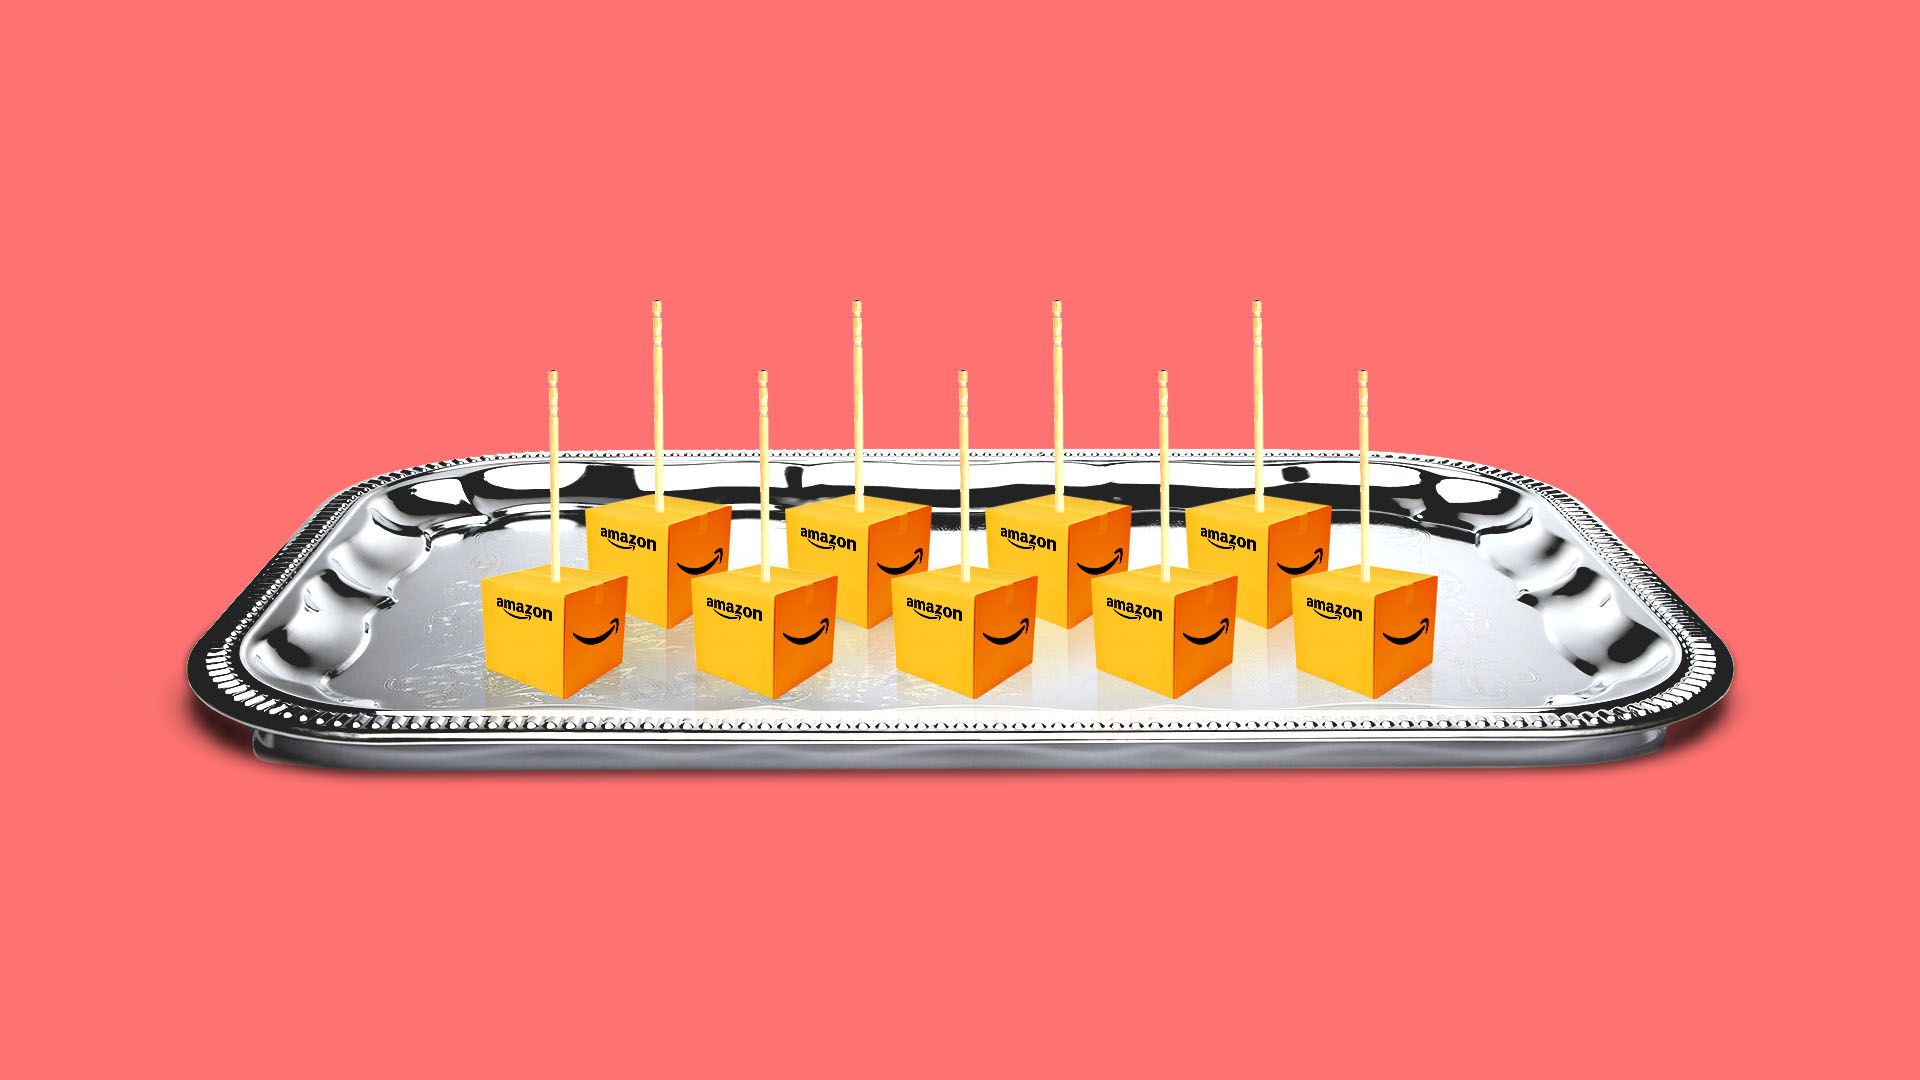 Illustration of small Amazon shipping boxes on a platter